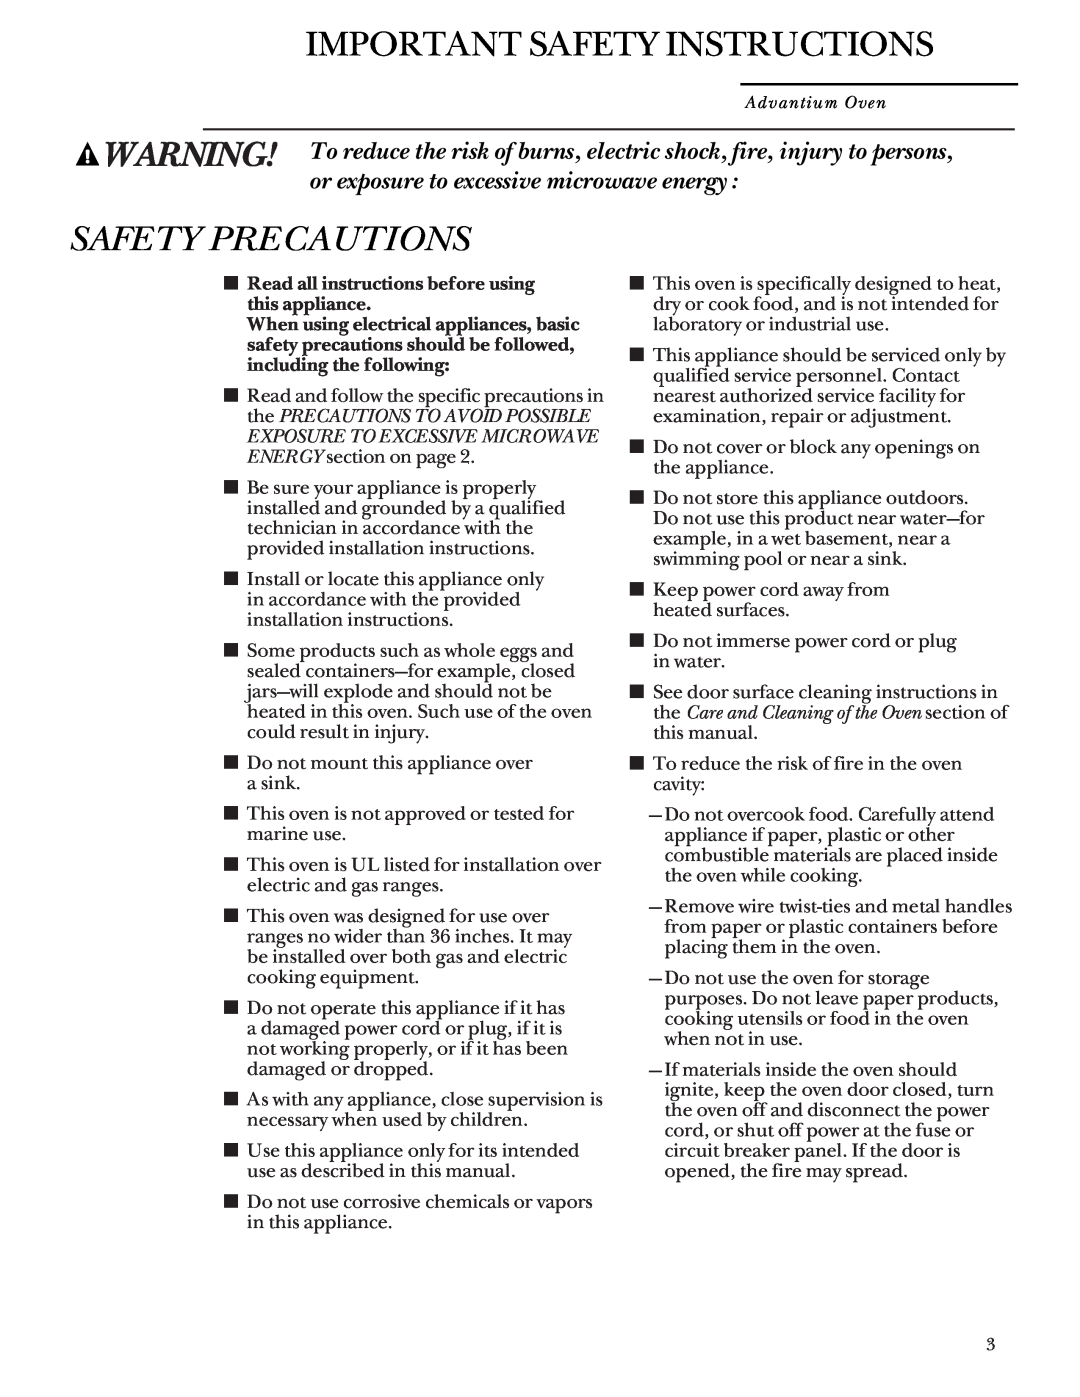 GE SCA 2001, SCA 2000 owner manual Safety Precautions, Important Safety Instructions 